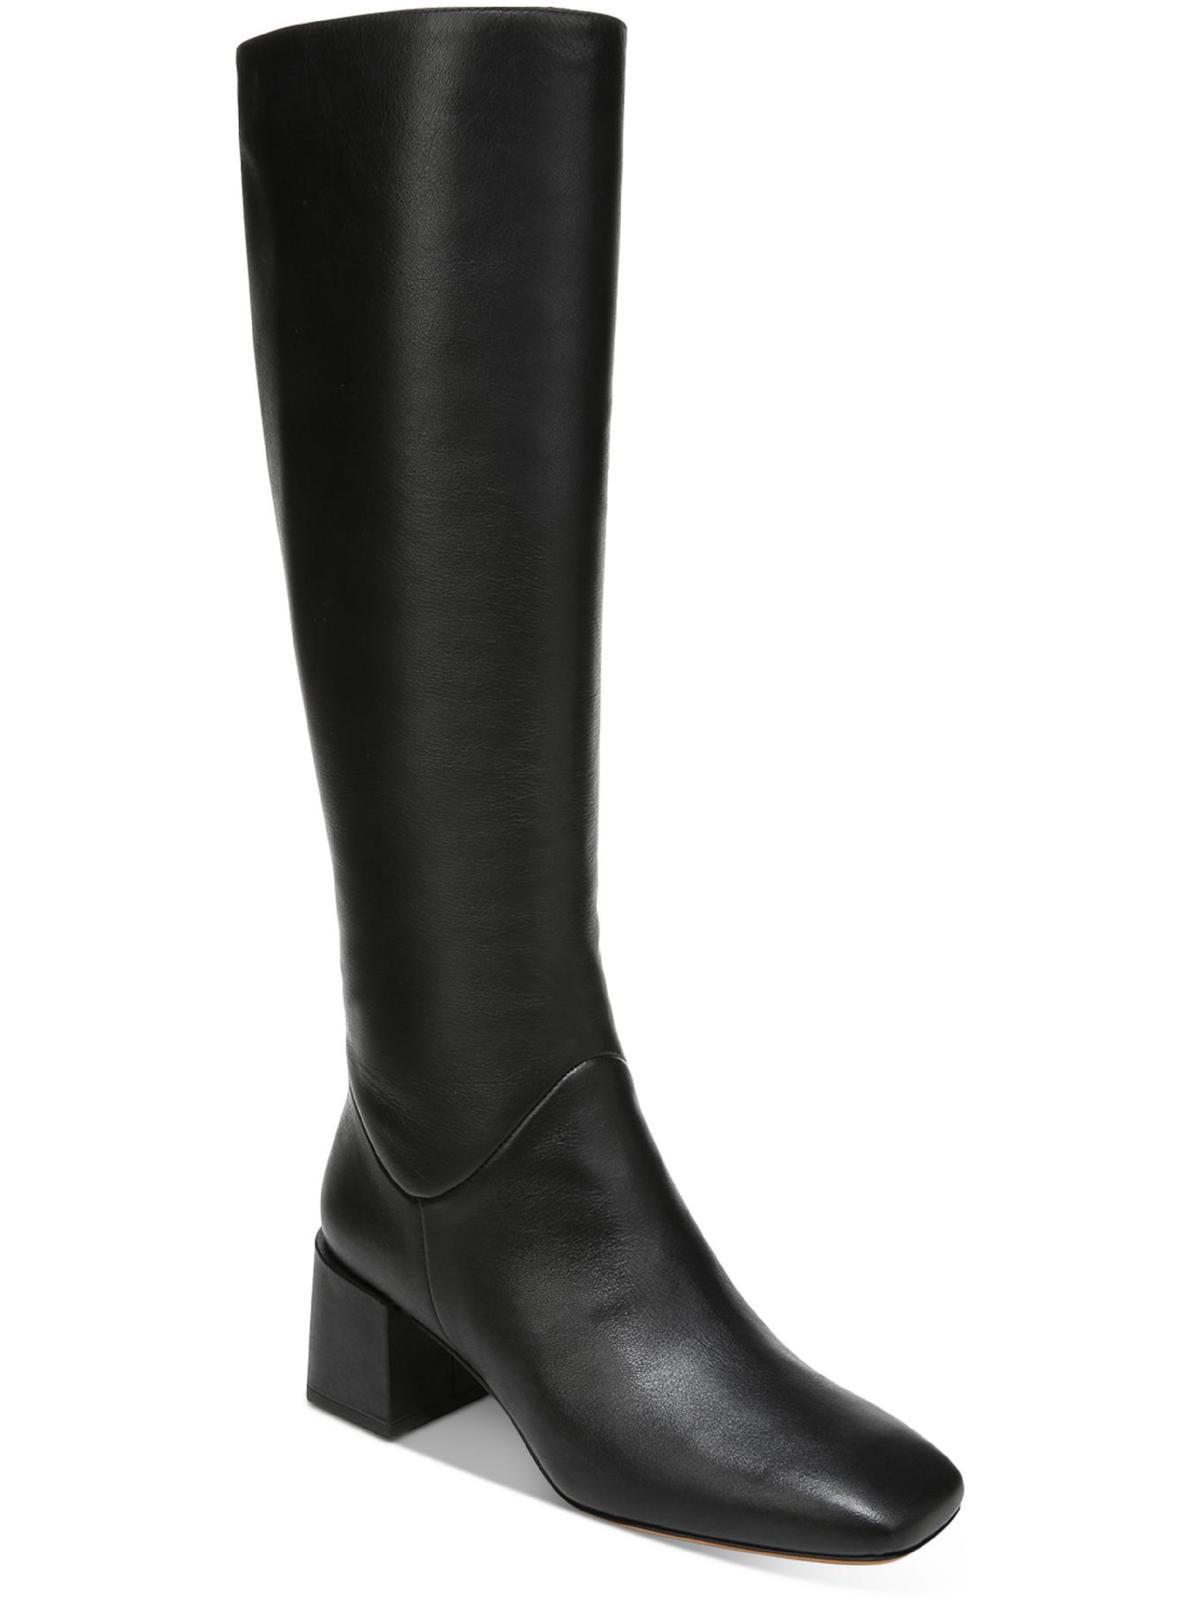 Vince Kendra Leather Square Toe Knee-high Boots in Black | Lyst